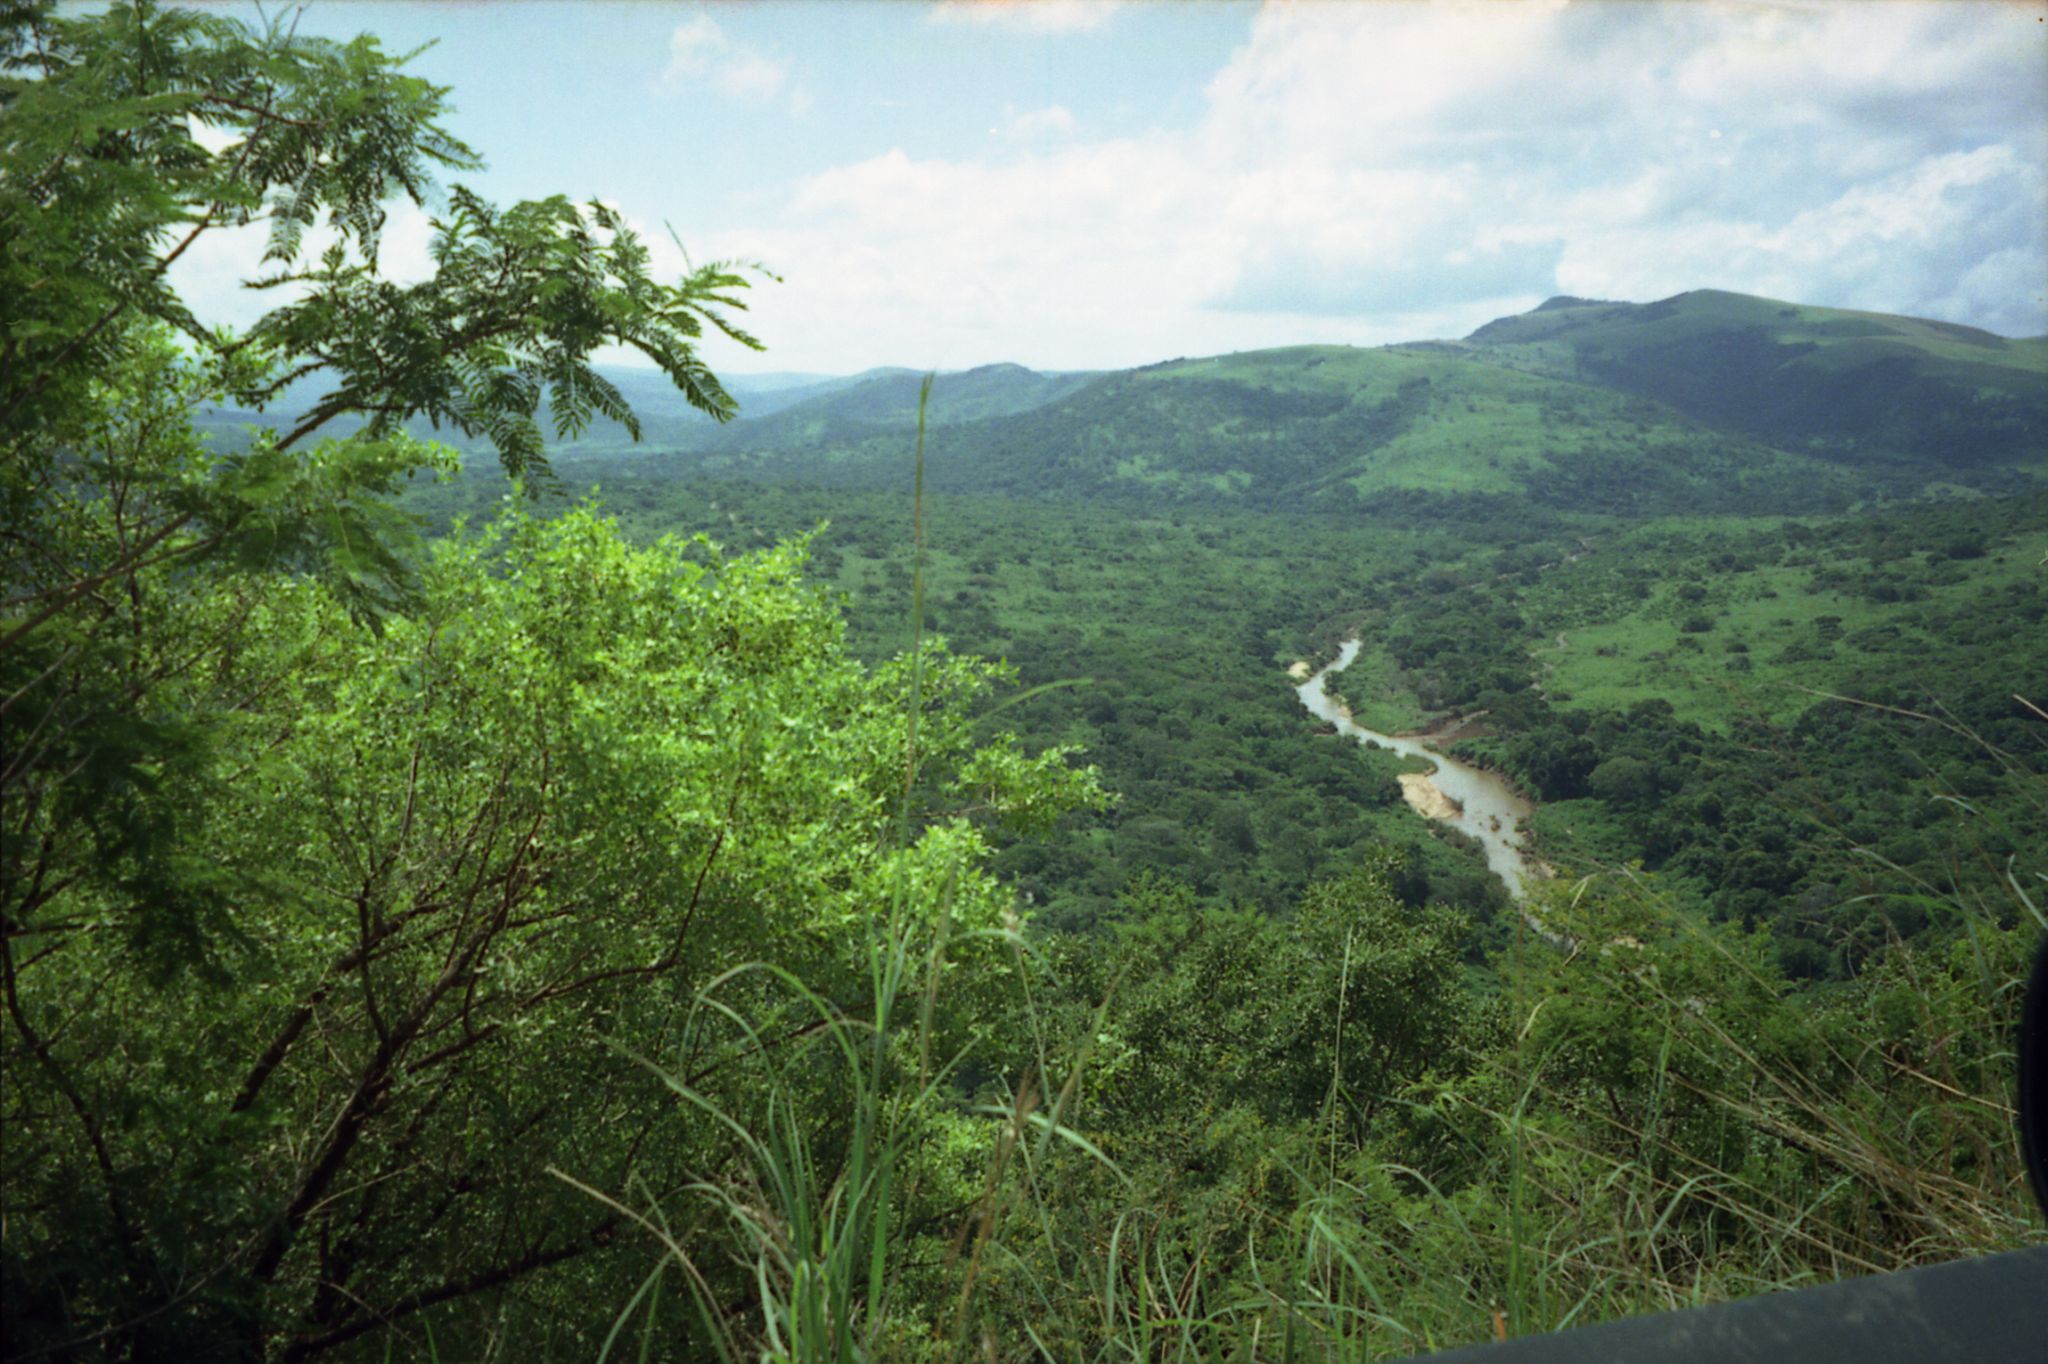 a view of some hills and a river